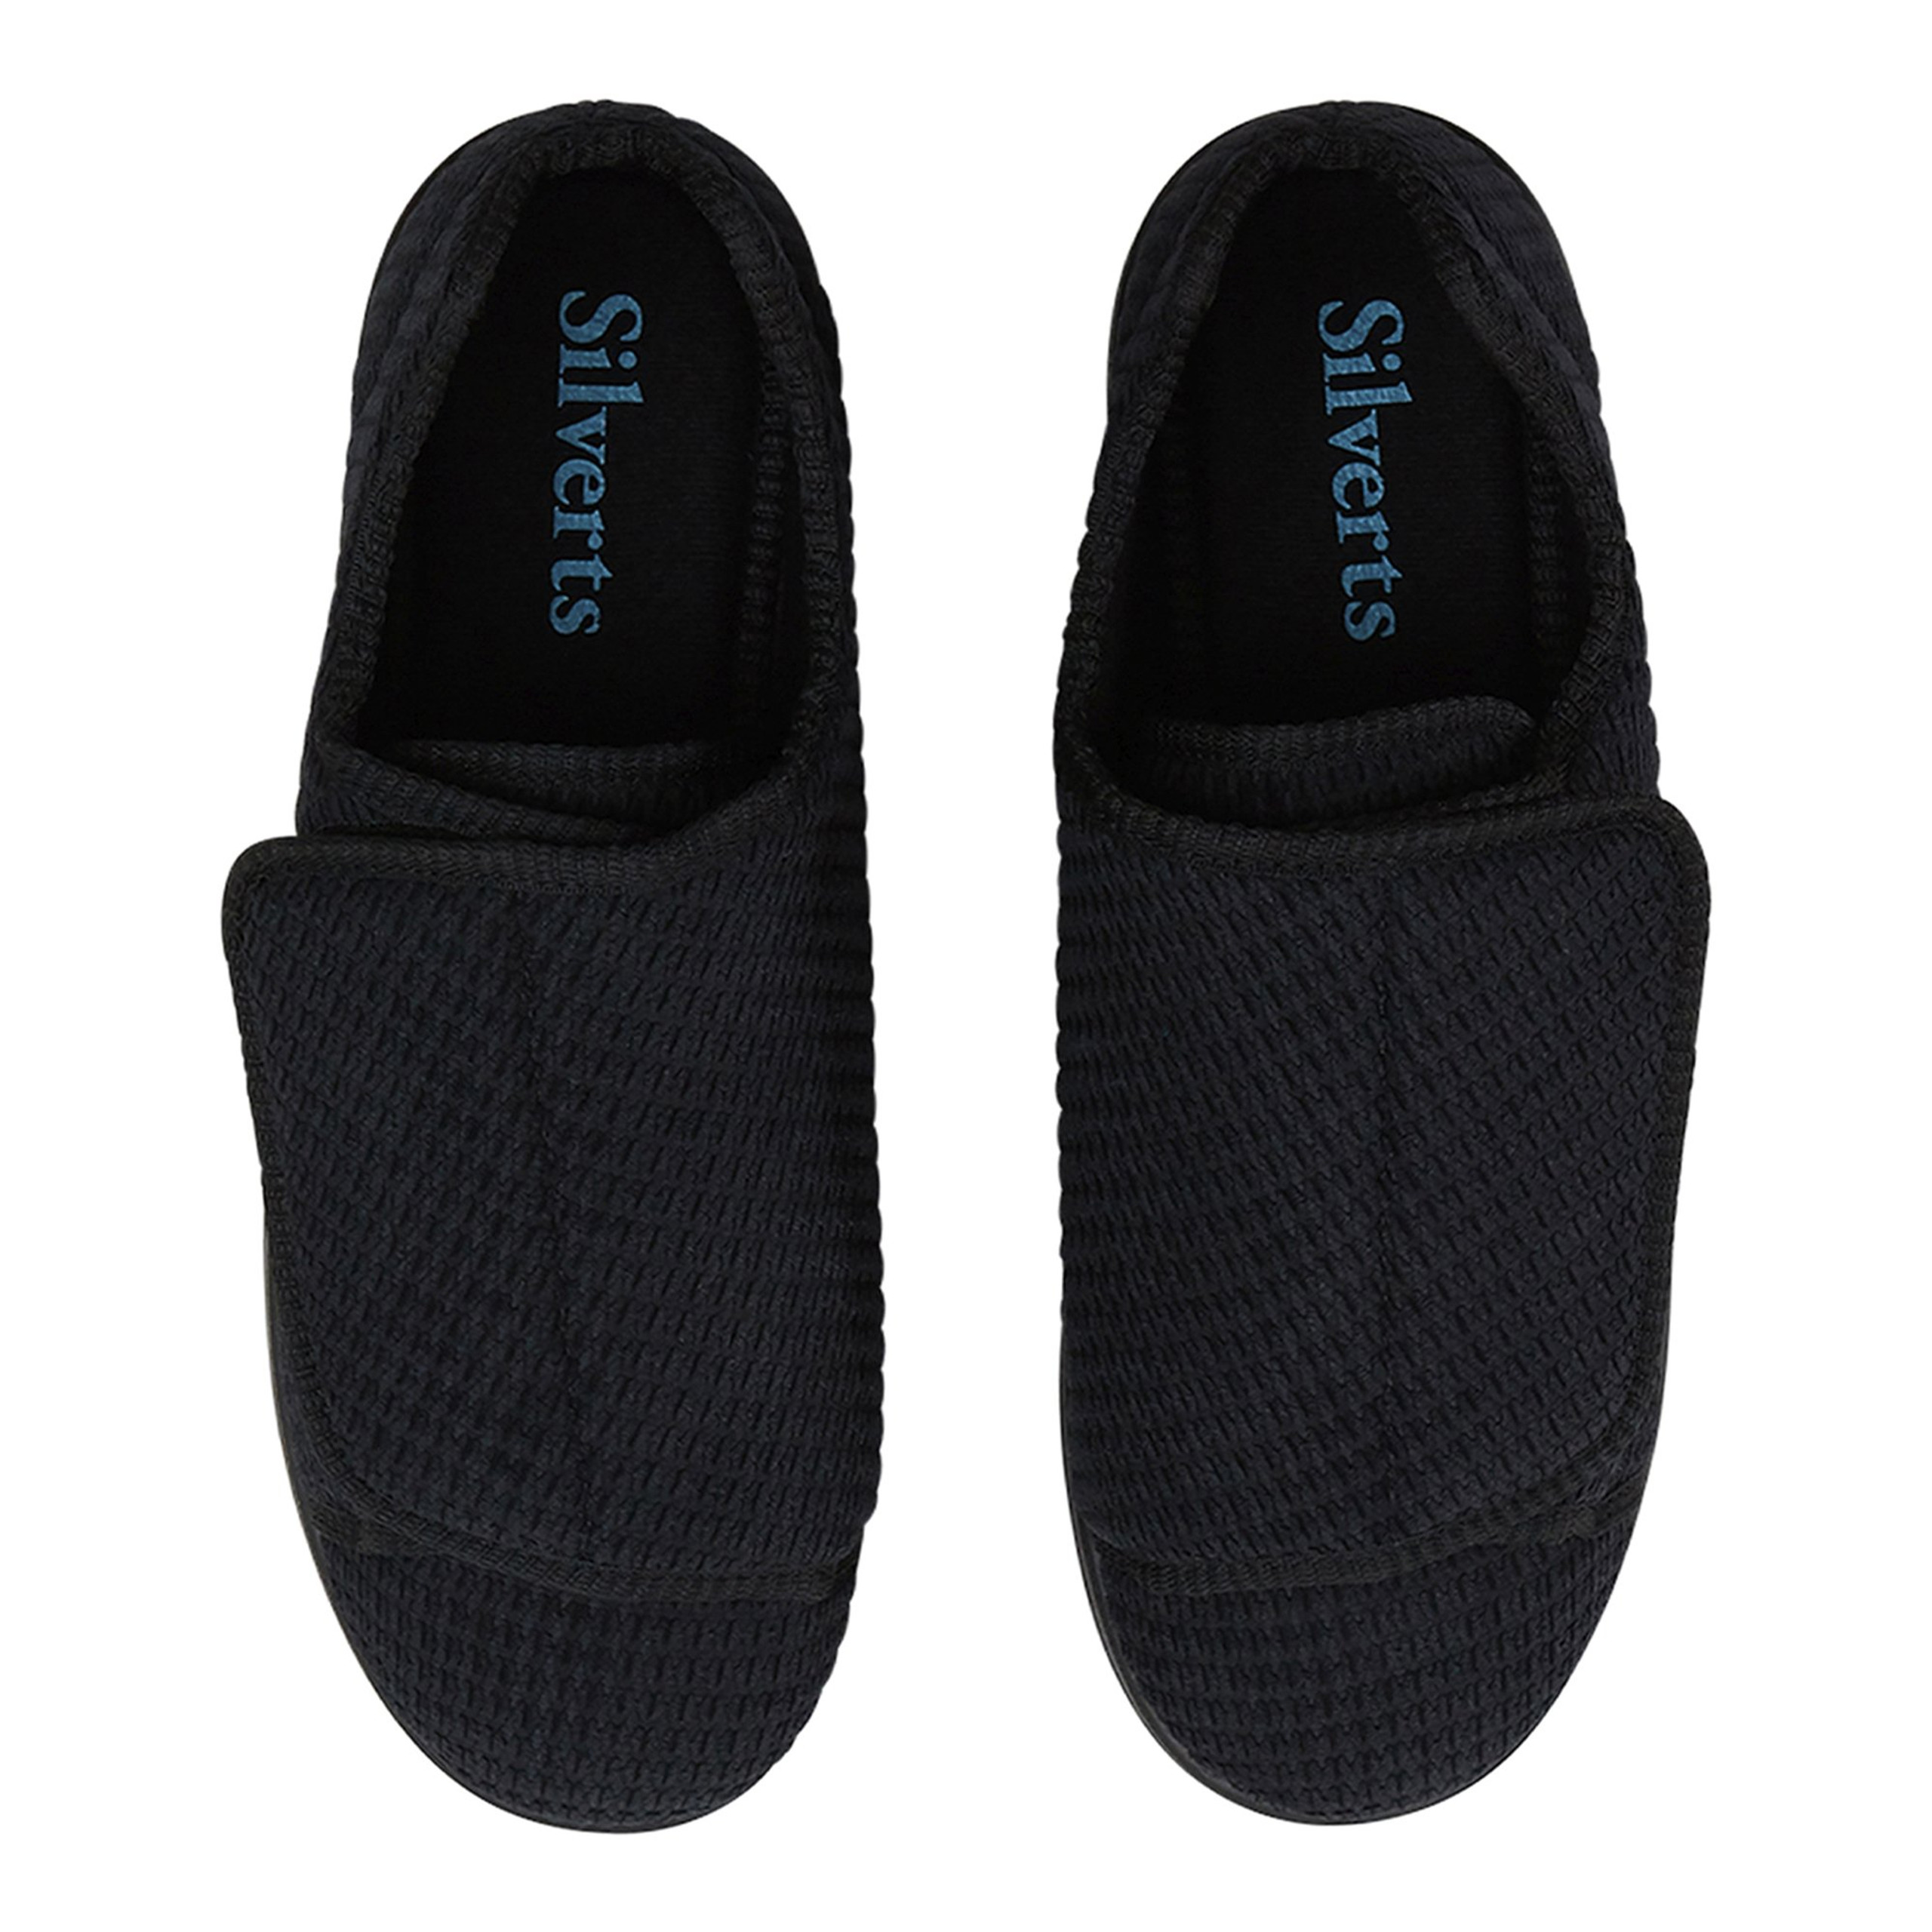 Silverts Adaptive Slippers for Senior Men - Easy Close, Extra Wide ...